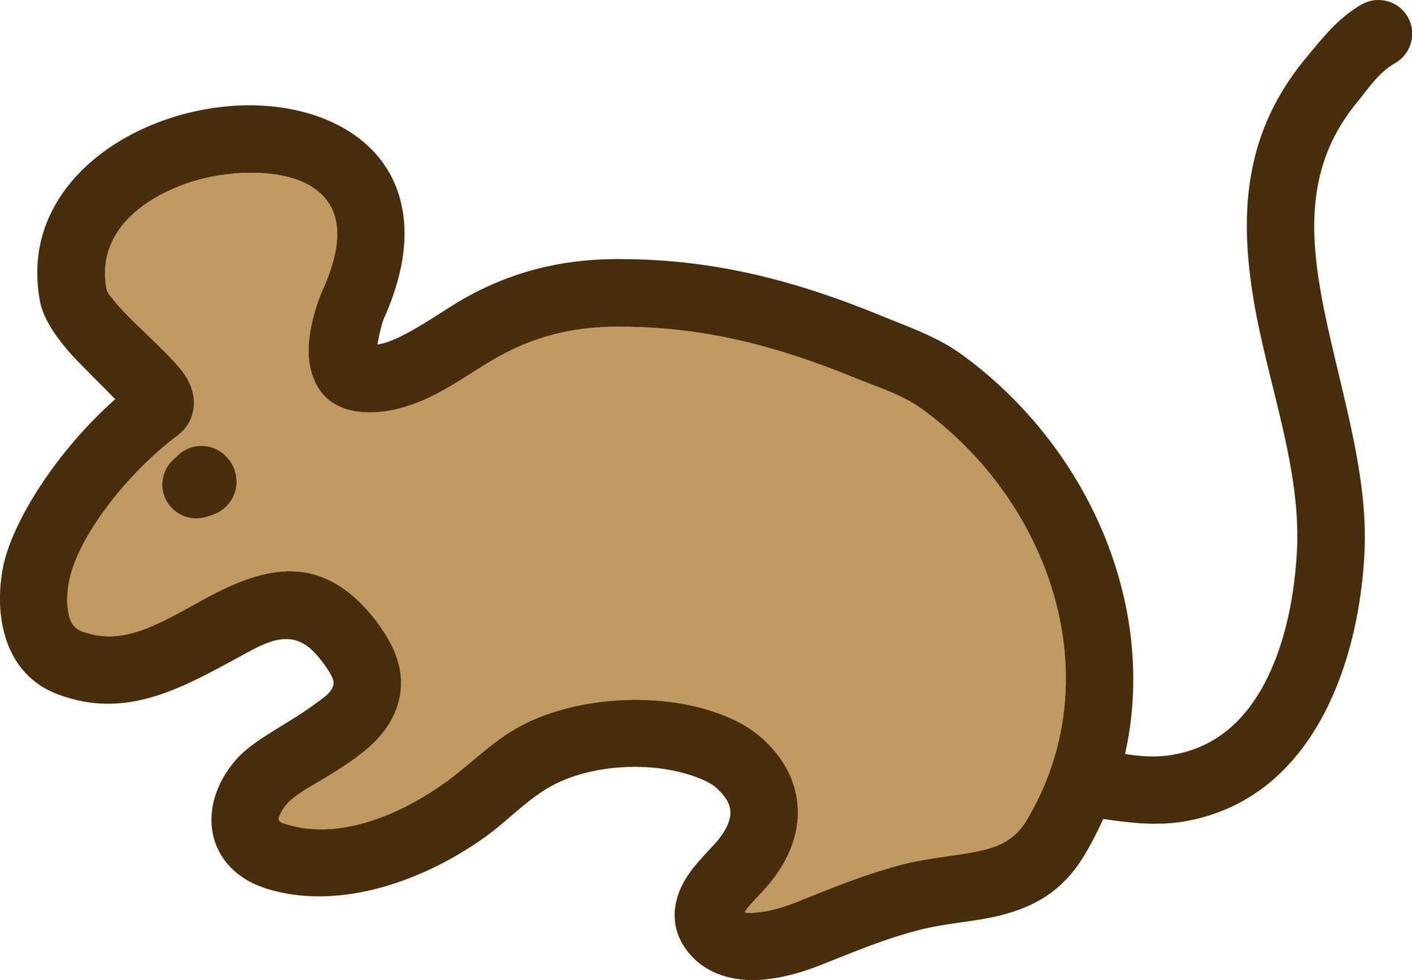 Pet mouse, illustration, vector on a white background.